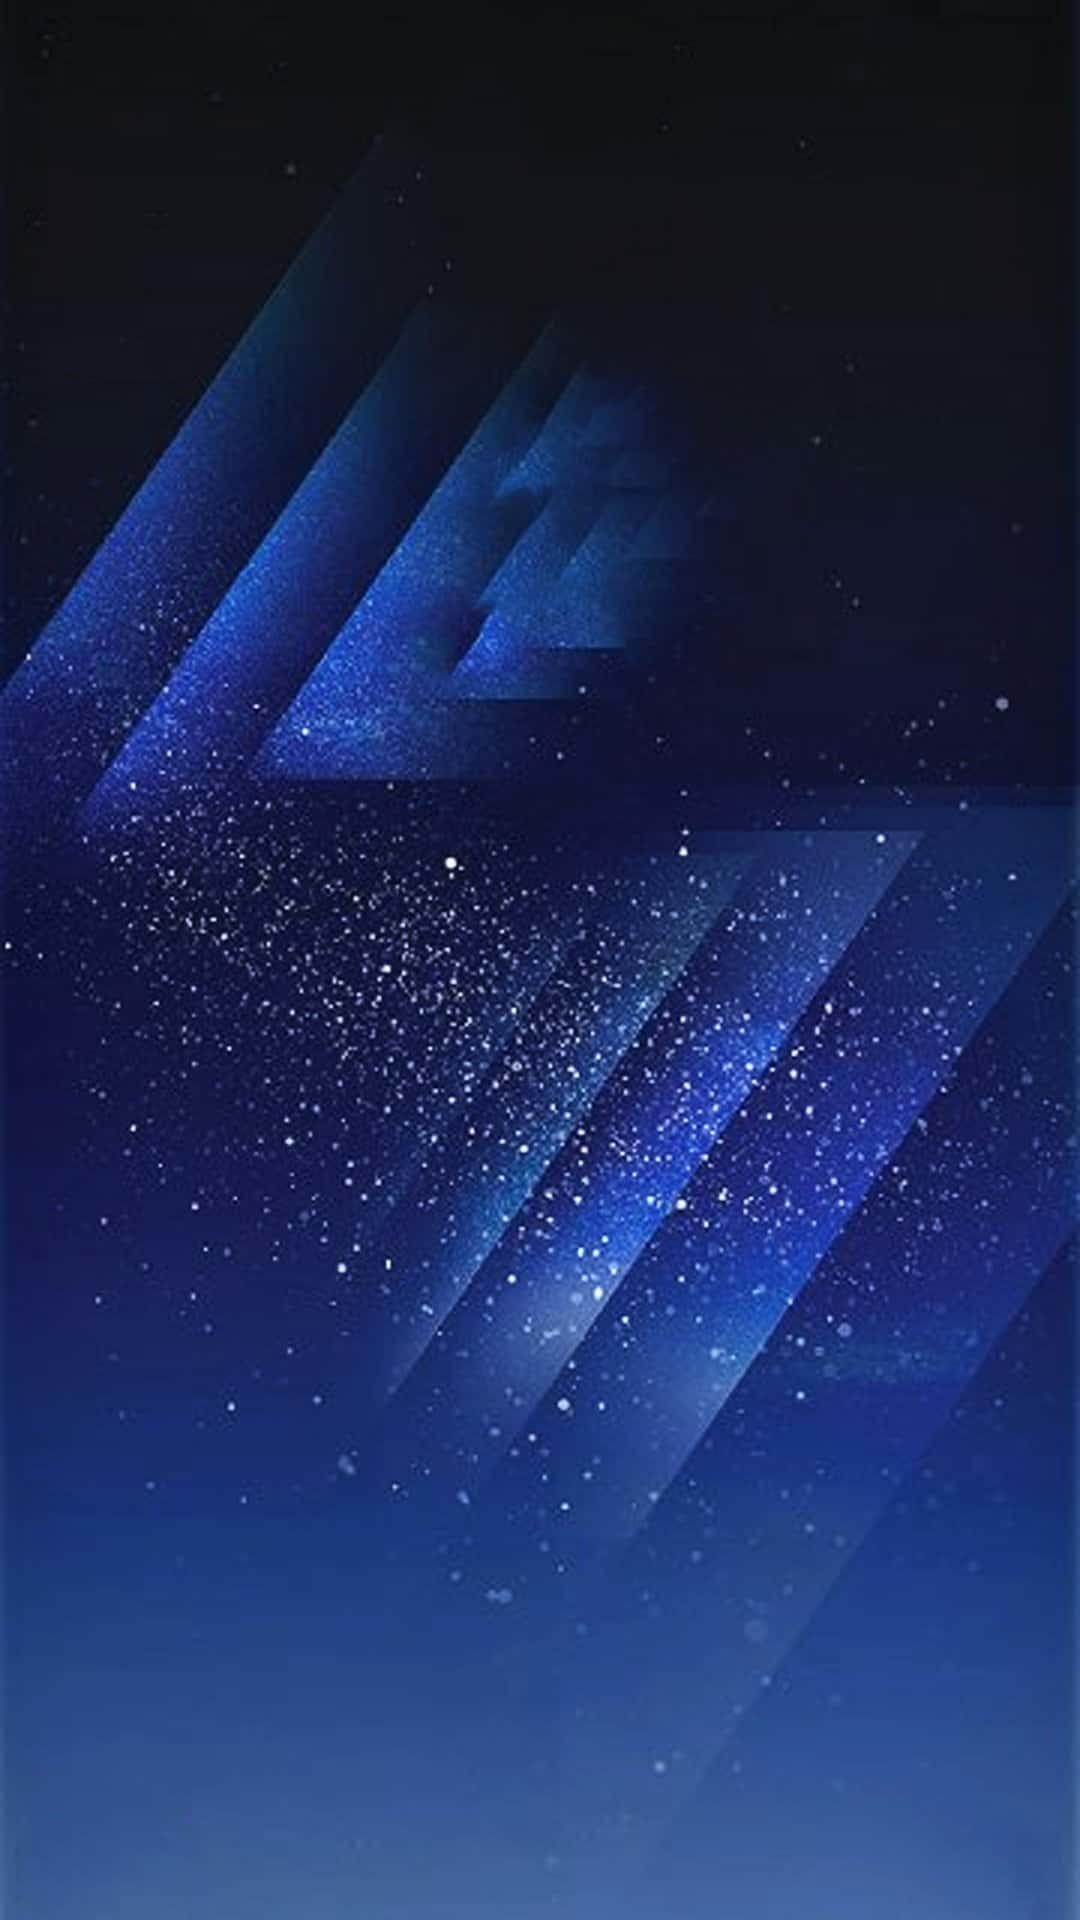 amoled wallpapers,blue,sky,electric blue,atmosphere,space